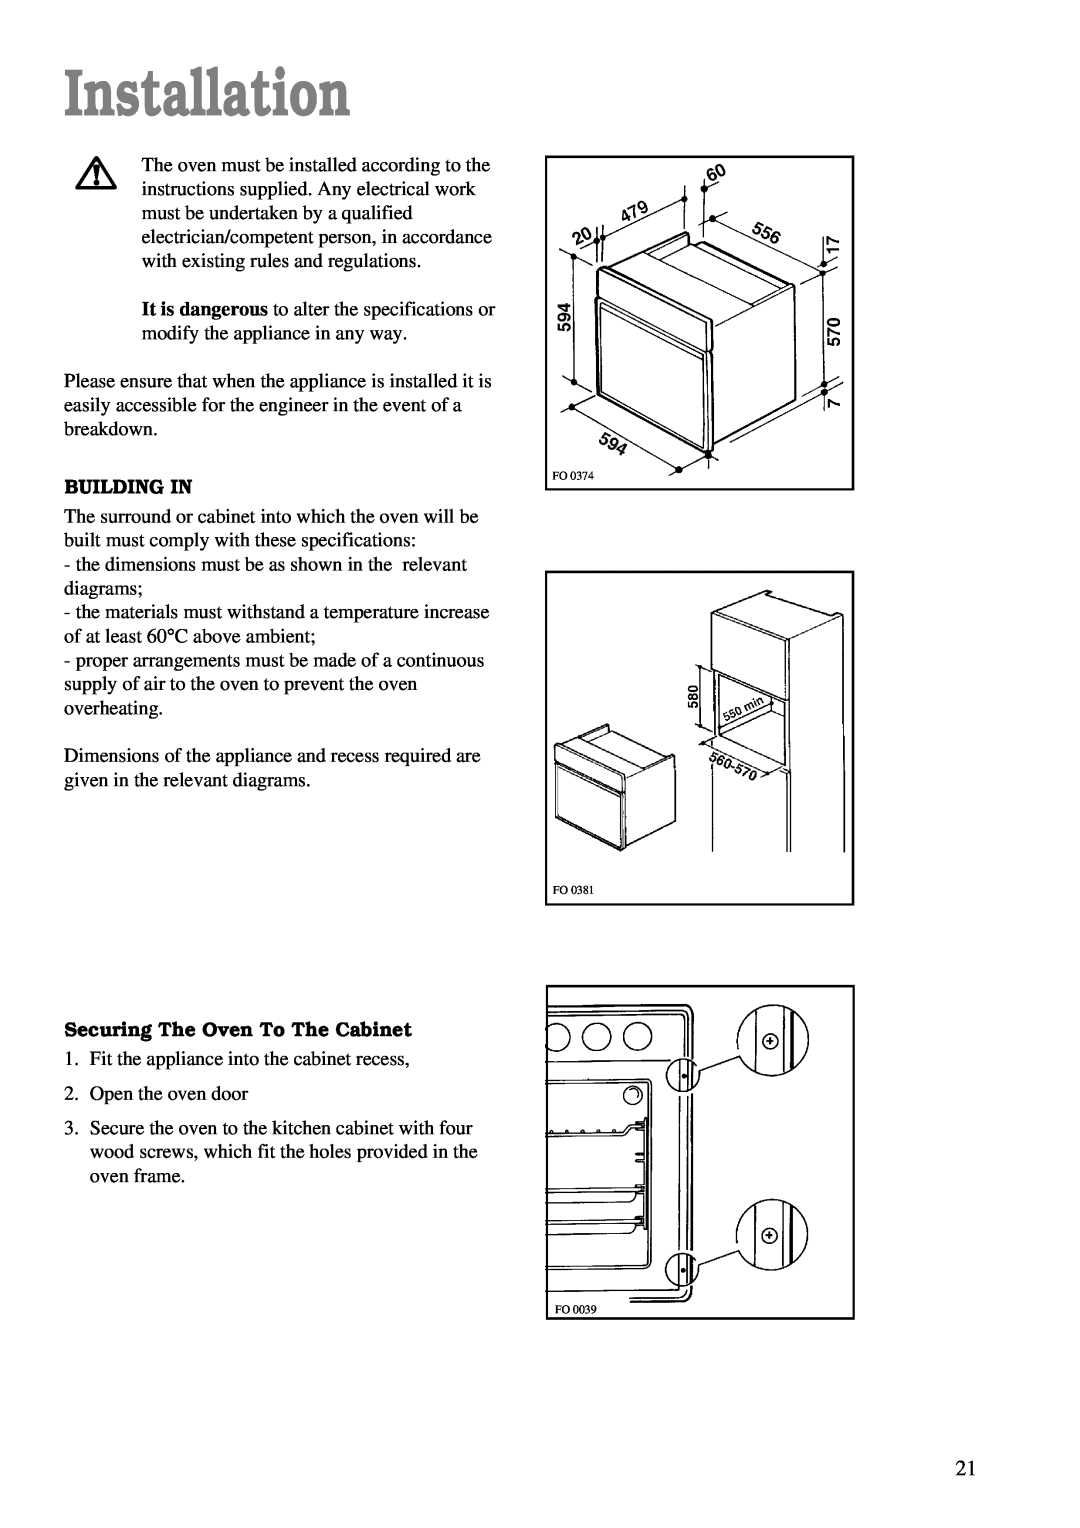 Zanussi ZBF 760 installation manual Installation, Building In, Securing The Oven To The Cabinet 